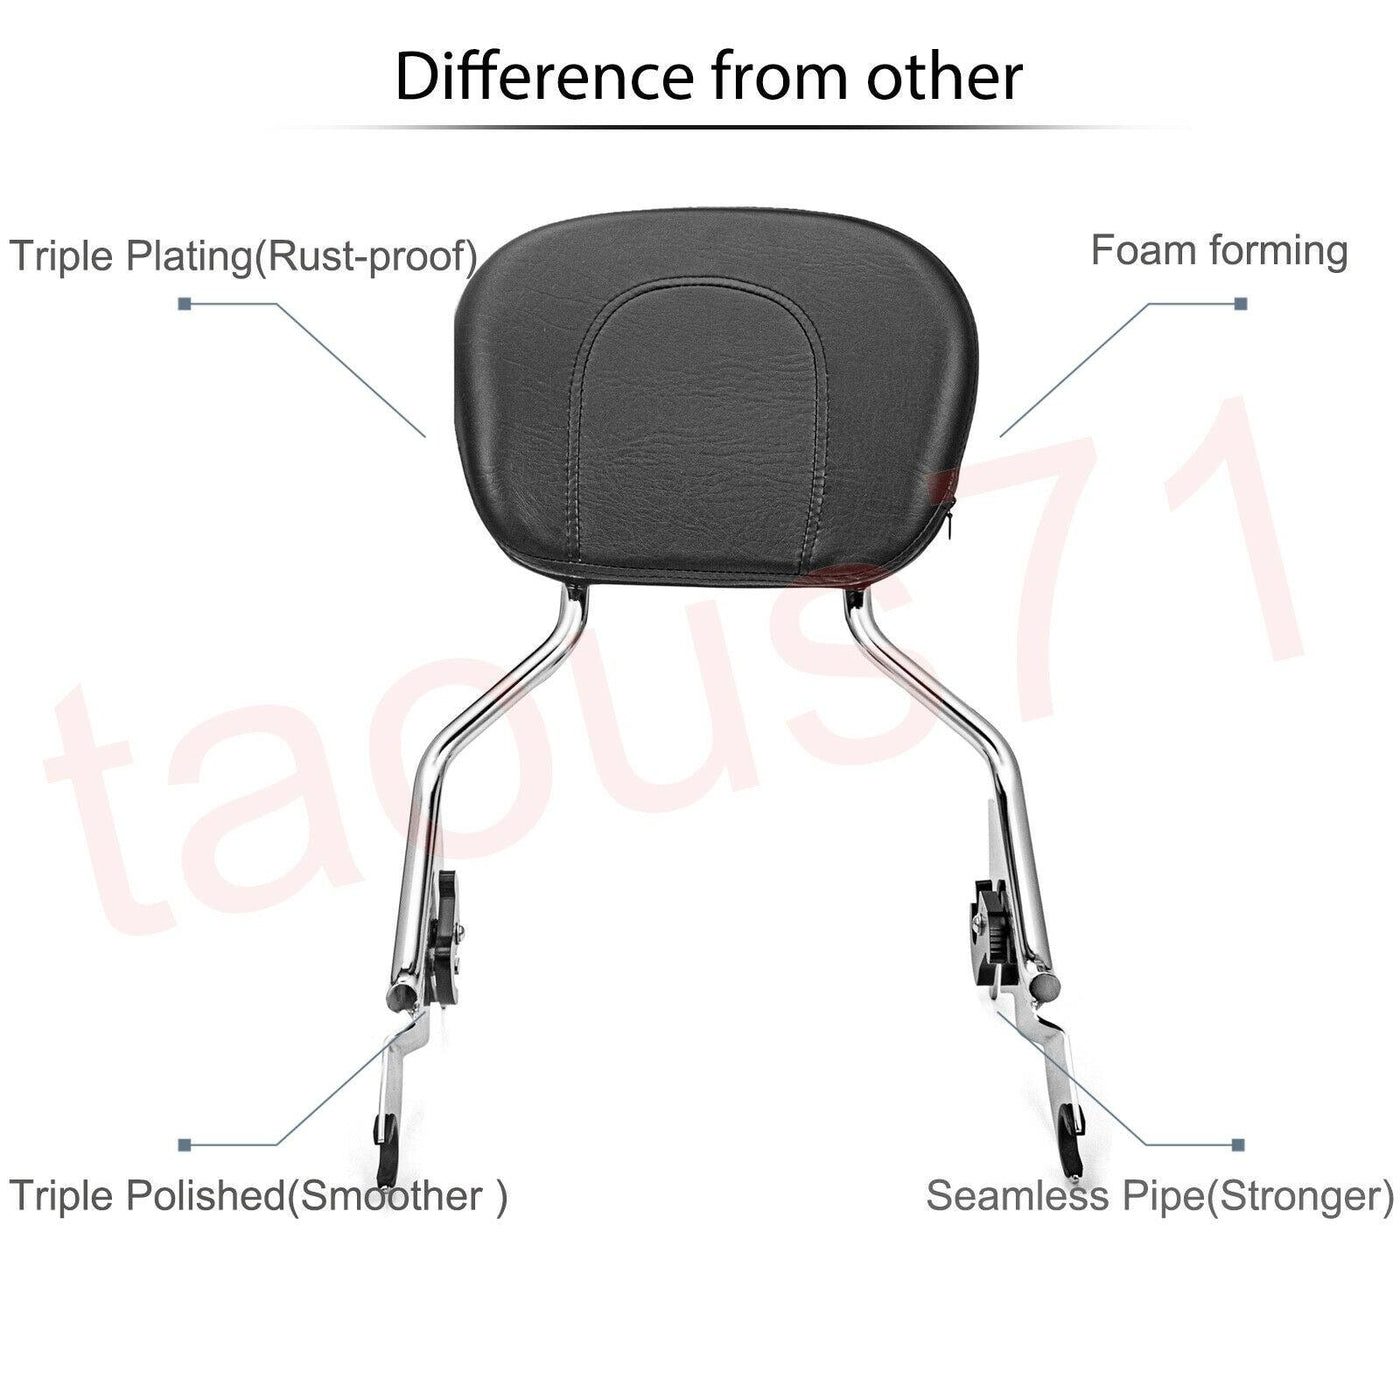 Detachable Backrest Sissy Bar w/ Stealth Luggage Rack For Harley Touring 09-21 - Moto Life Products